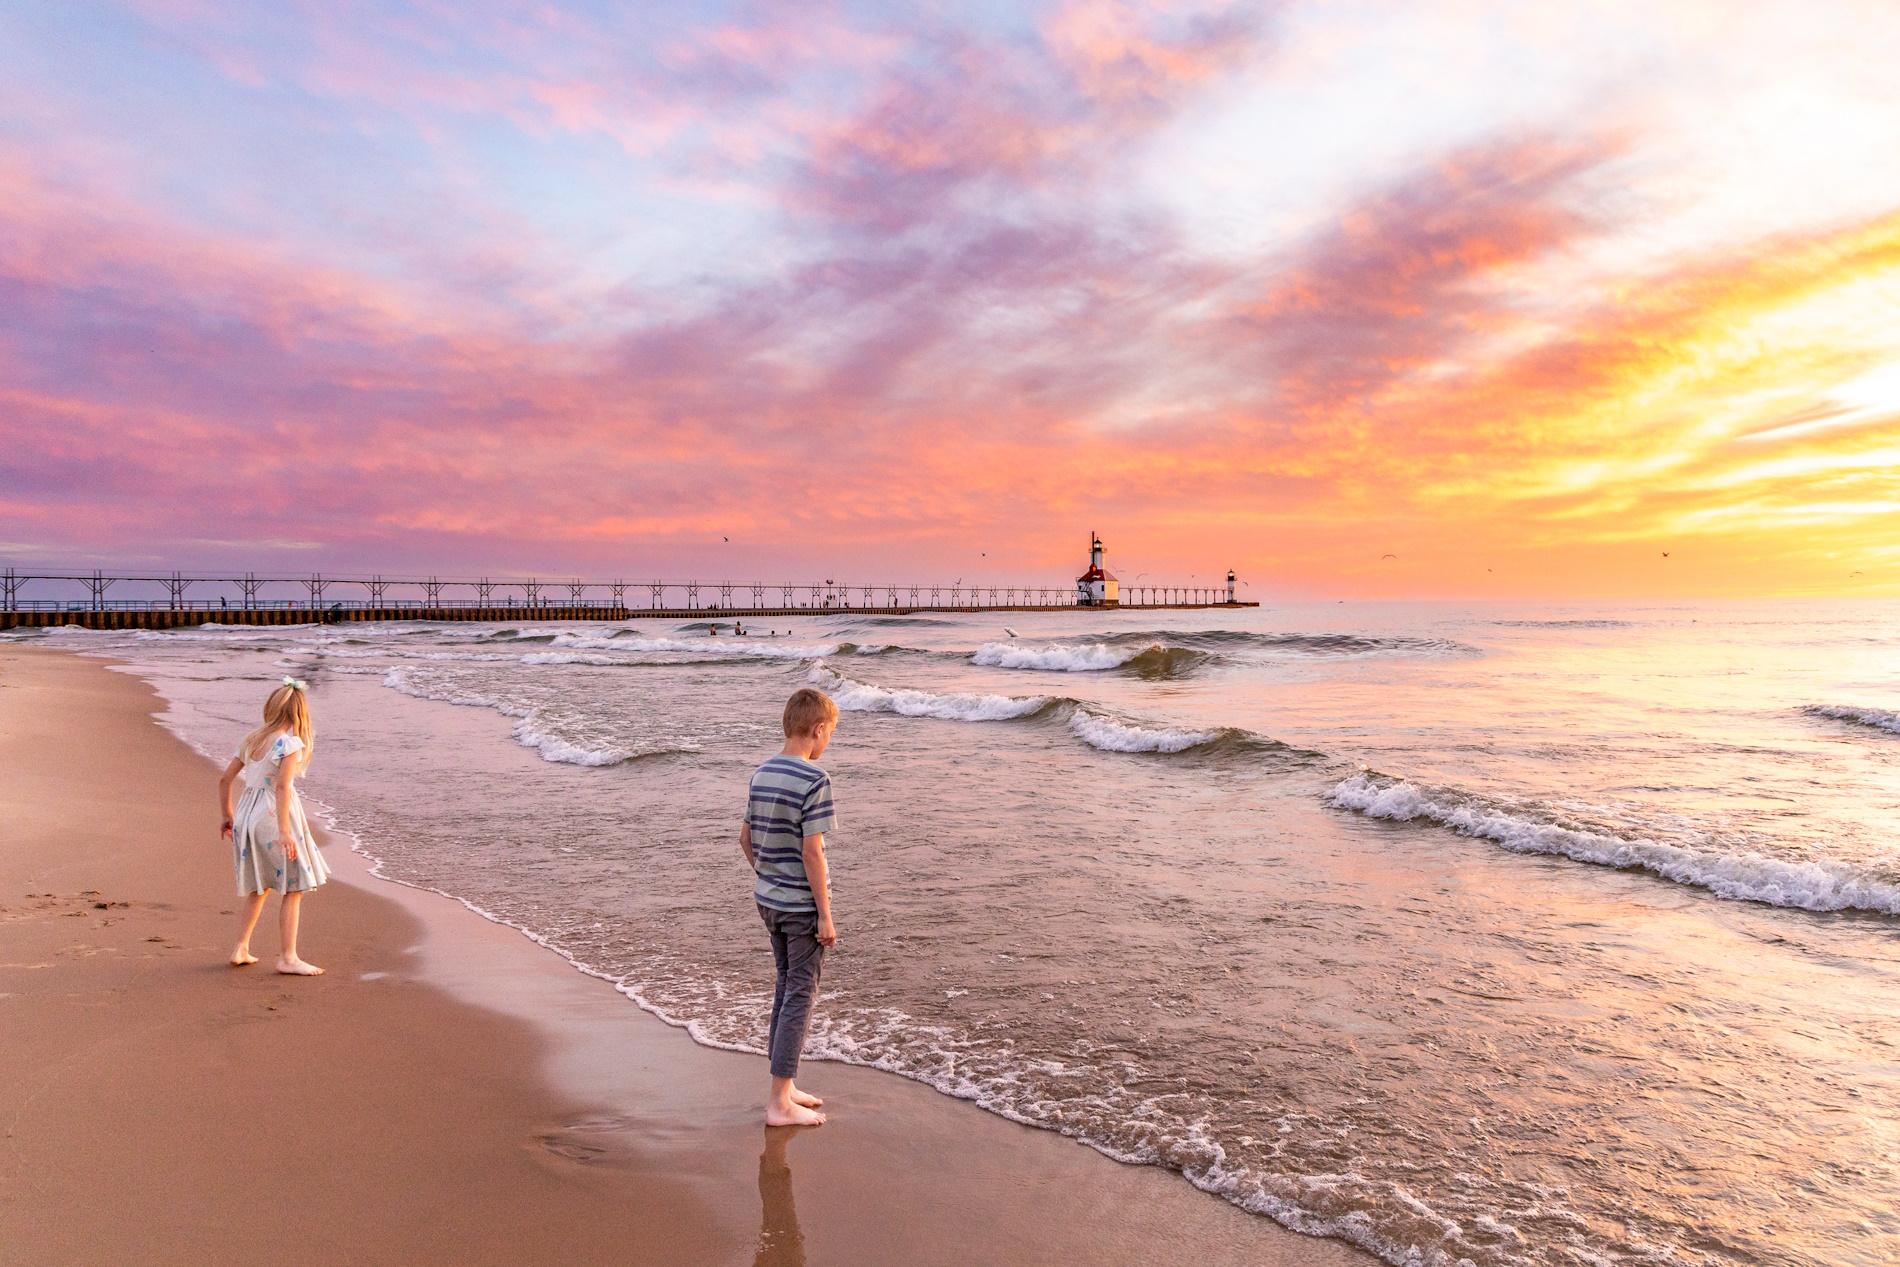 st joseph Tiscornia beach - young children on the beach at sunset with the lighthouse in background